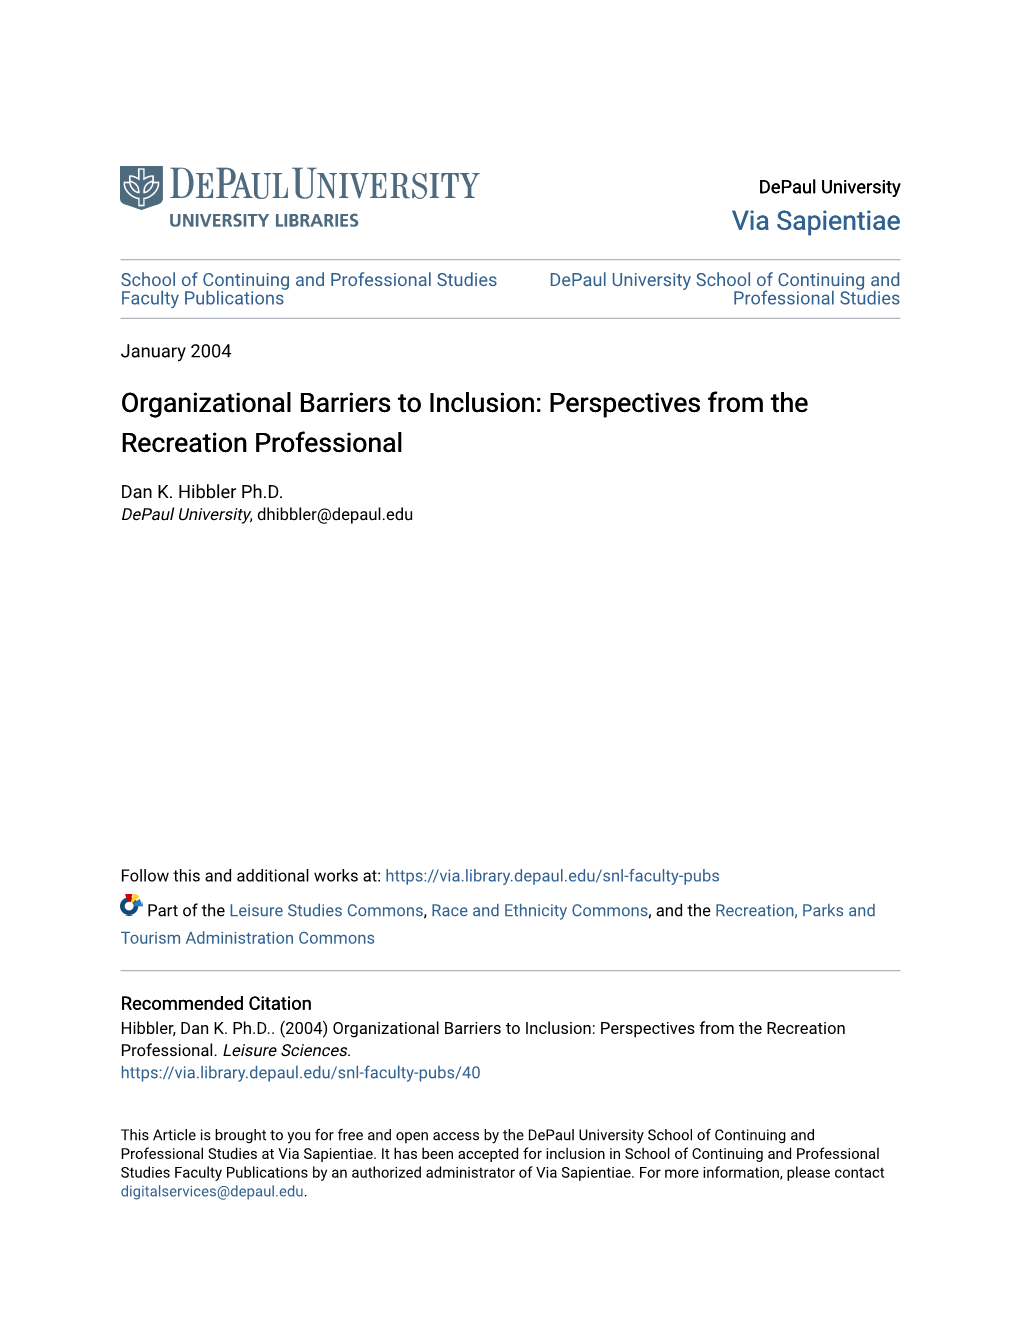 Organizational Barriers to Inclusion: Perspectives from the Recreation Professional